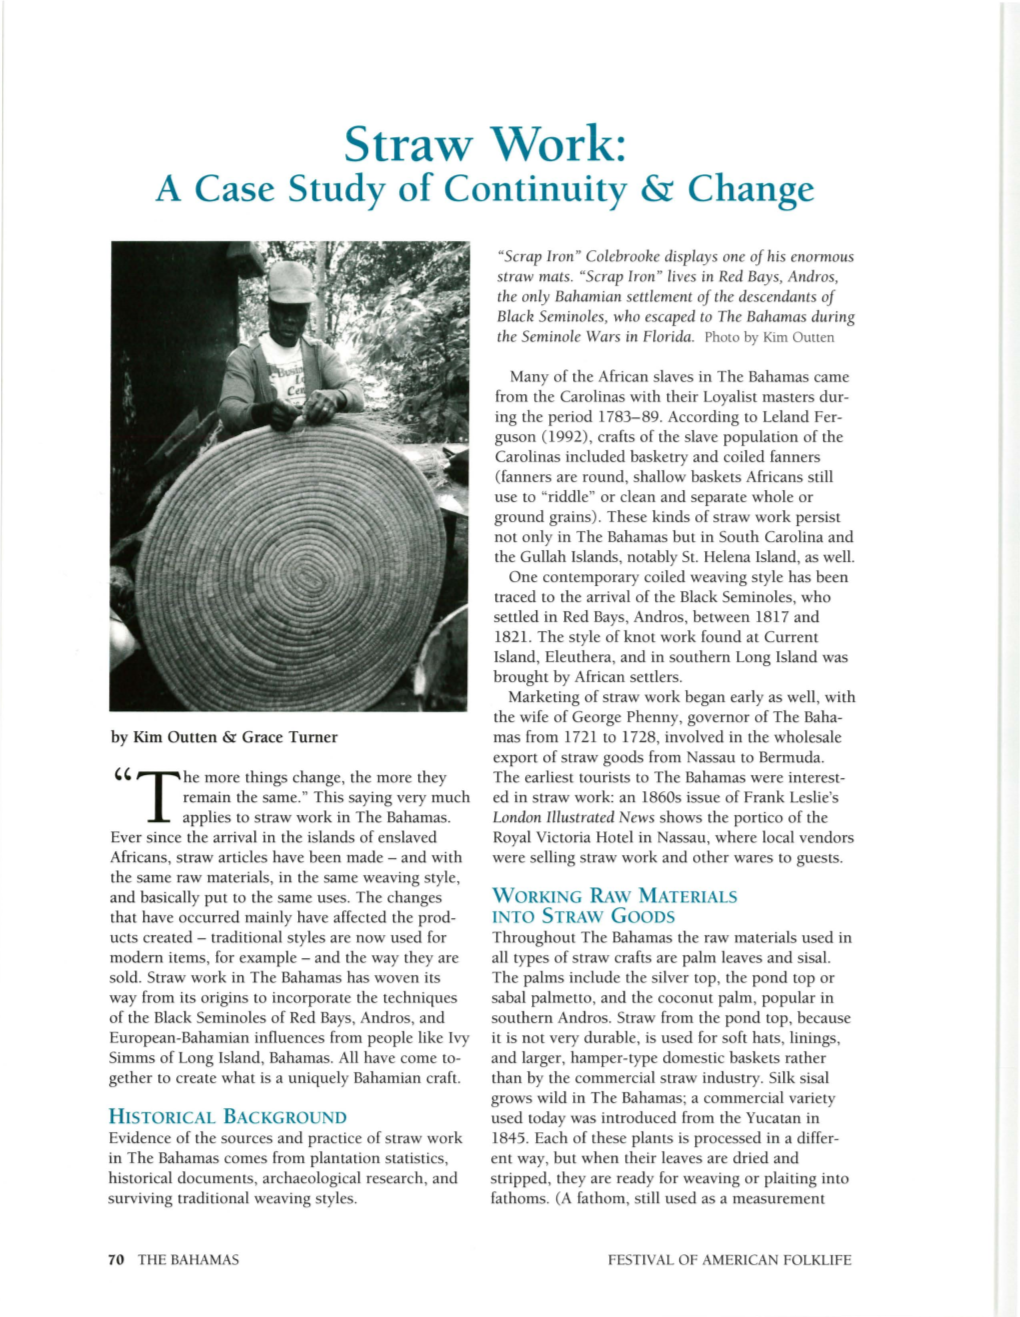 Straw Work: a Case Study of Continuity & Change